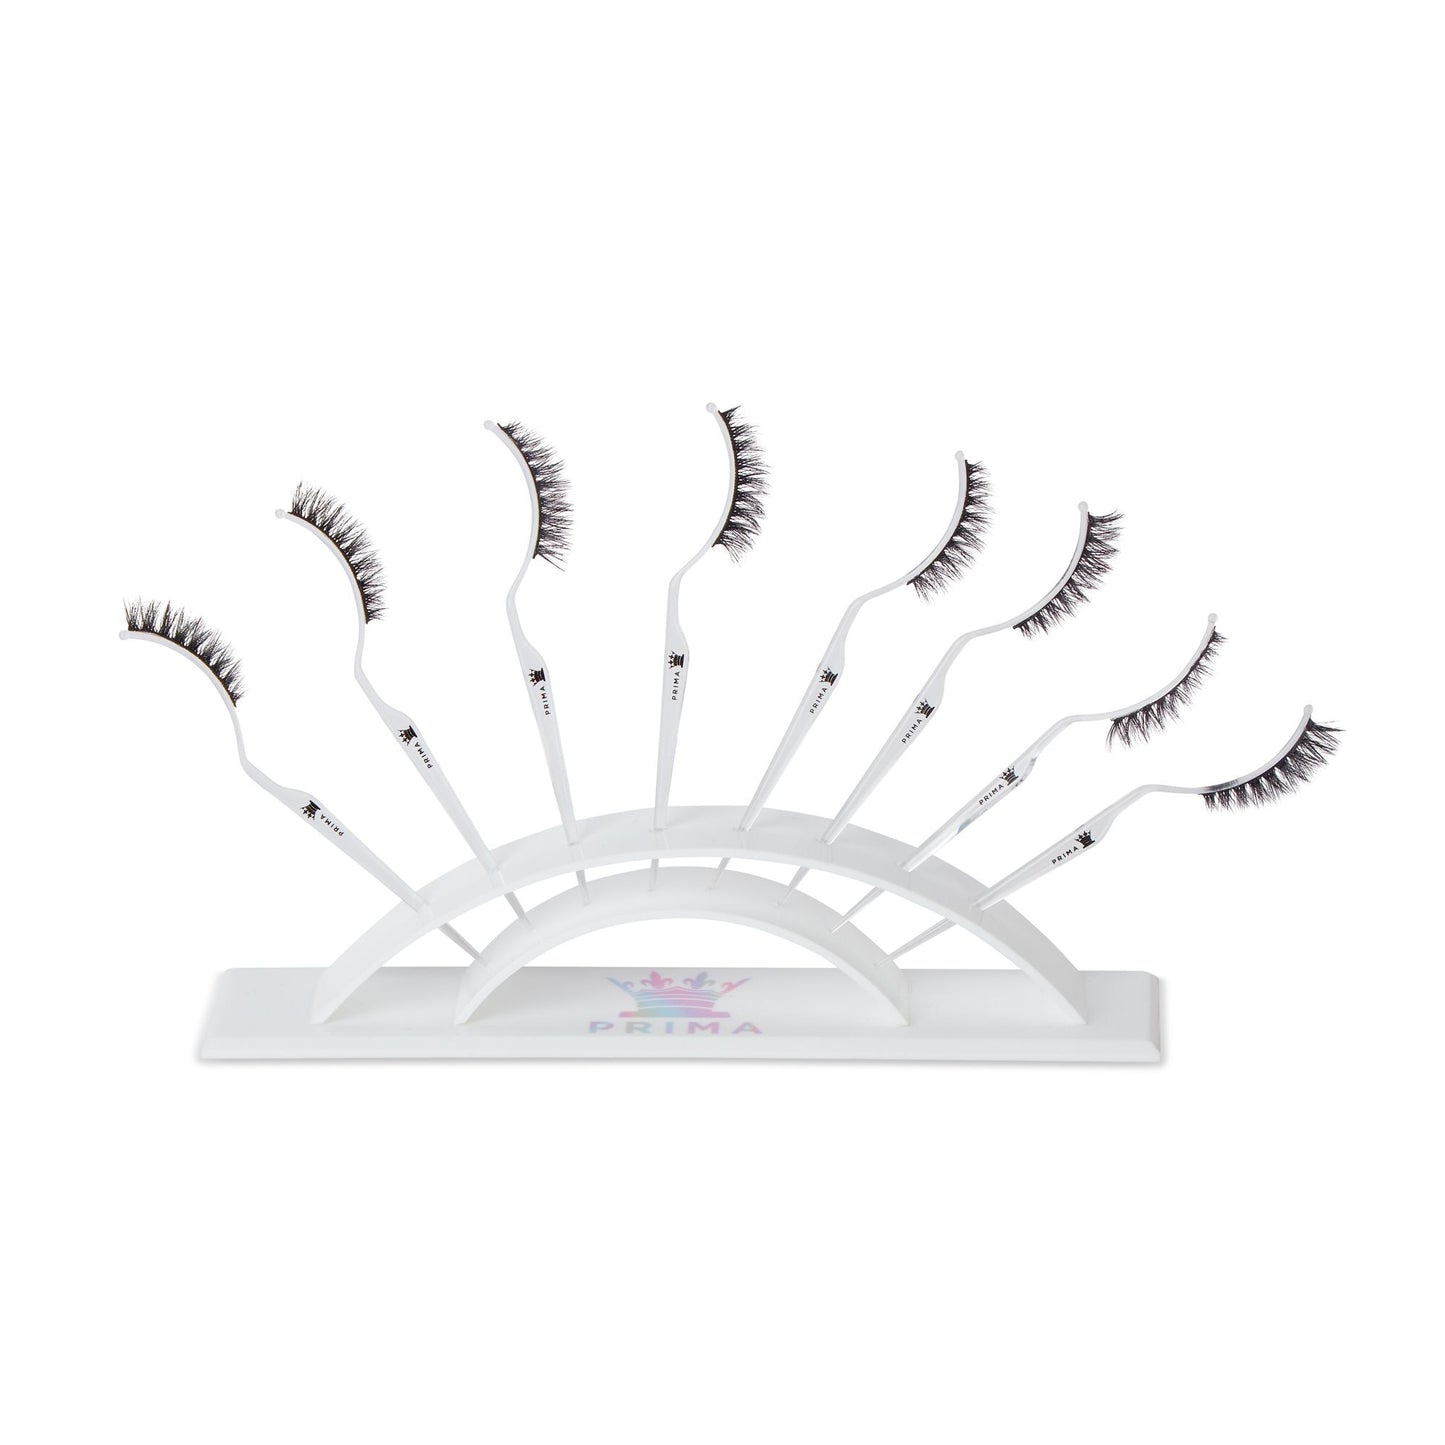 Lash Display Stand - Try on Wands